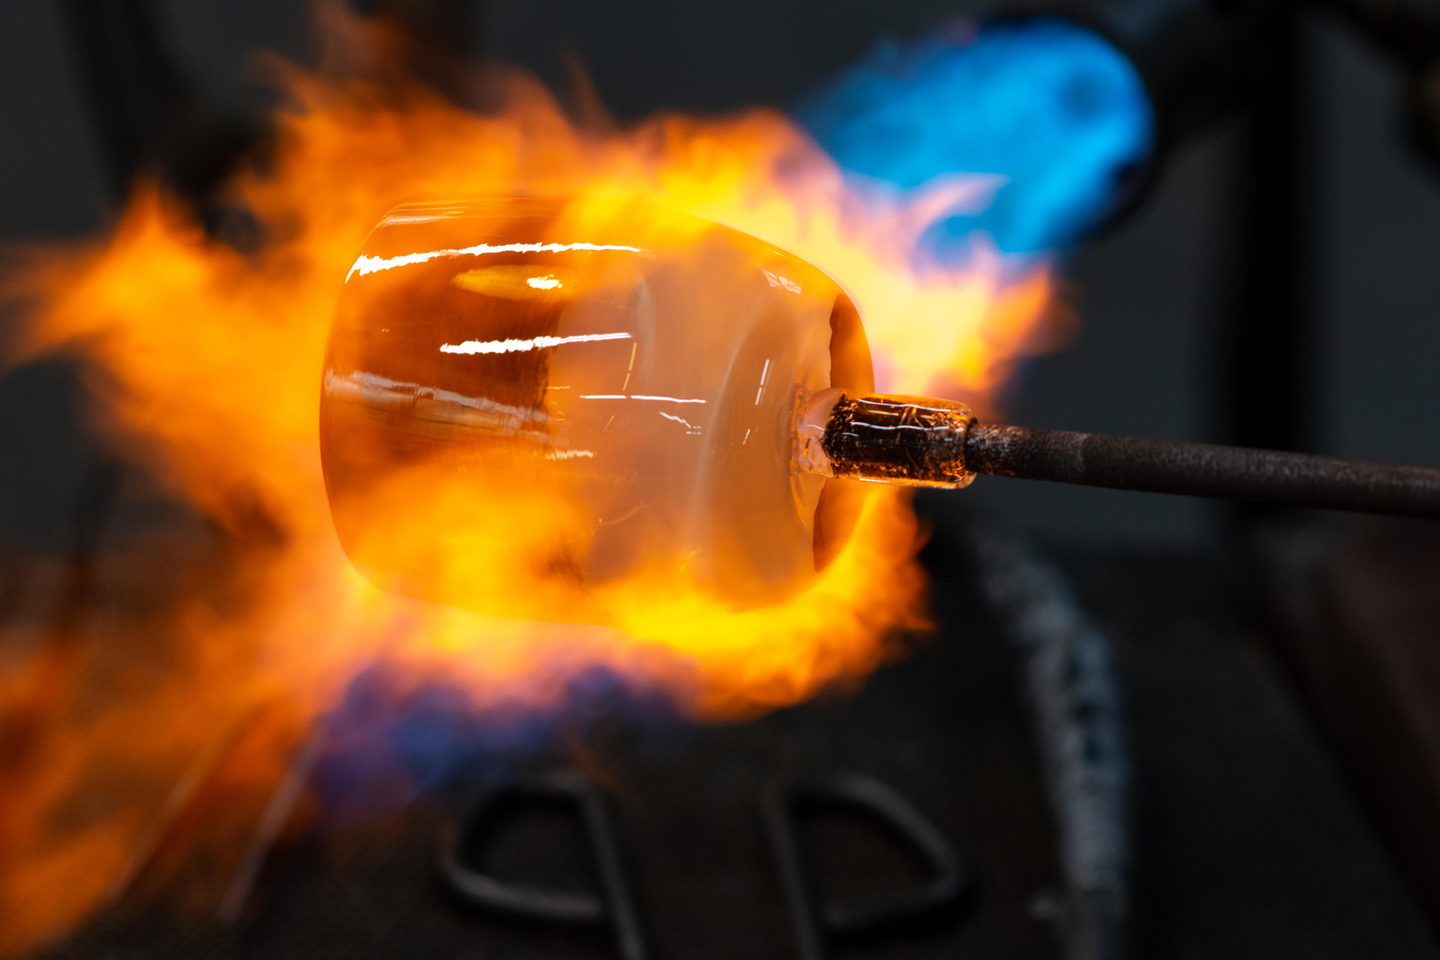 NY Glass Blowing & Fire Arts